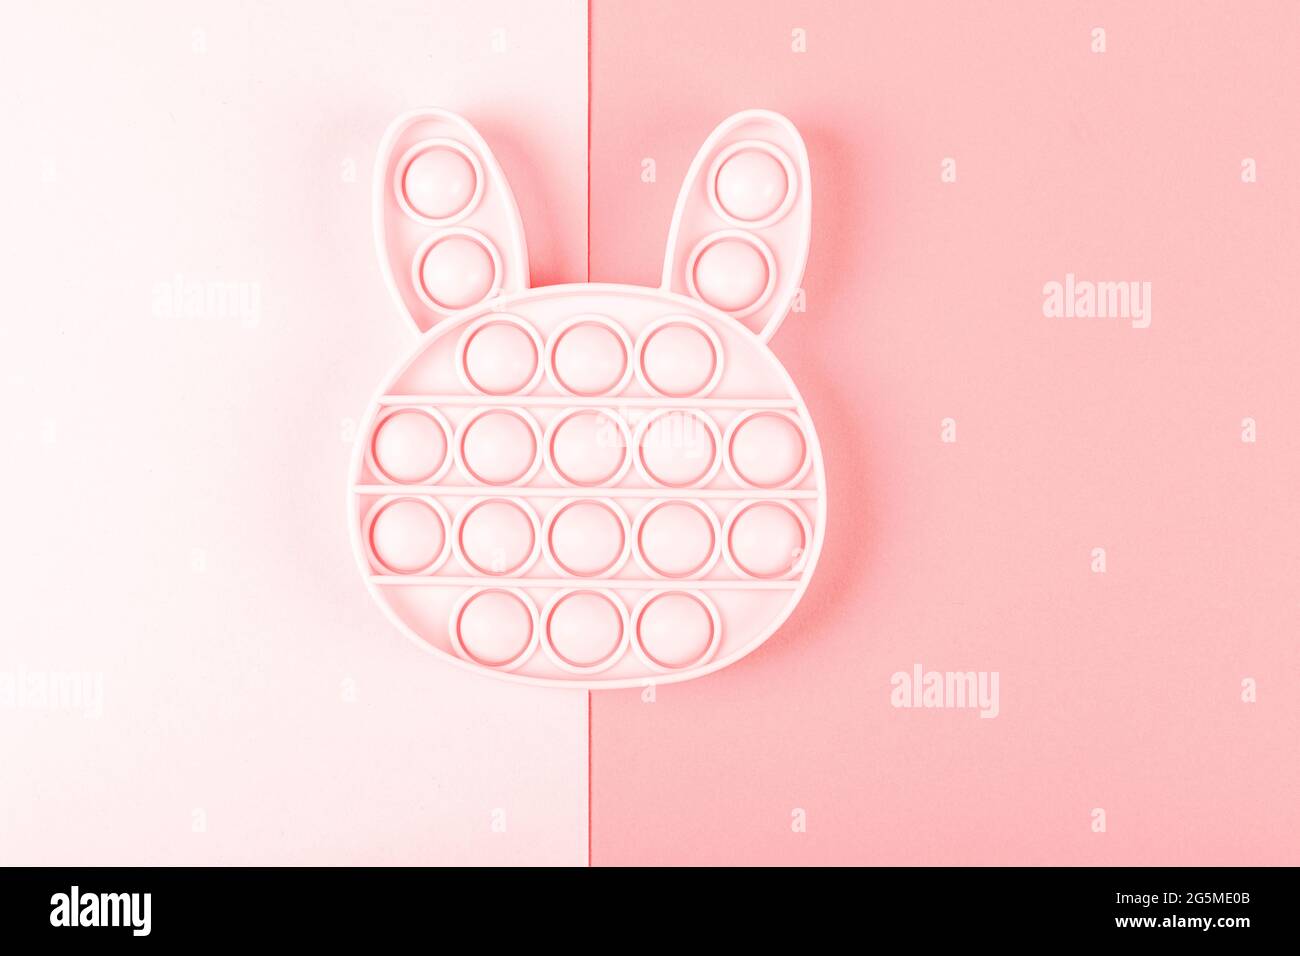 New silcone toy pop it in shape of bunny on the pink background. New sensory anti-stress toy for children and adult. Copy space. Flat lay. Stock Photo